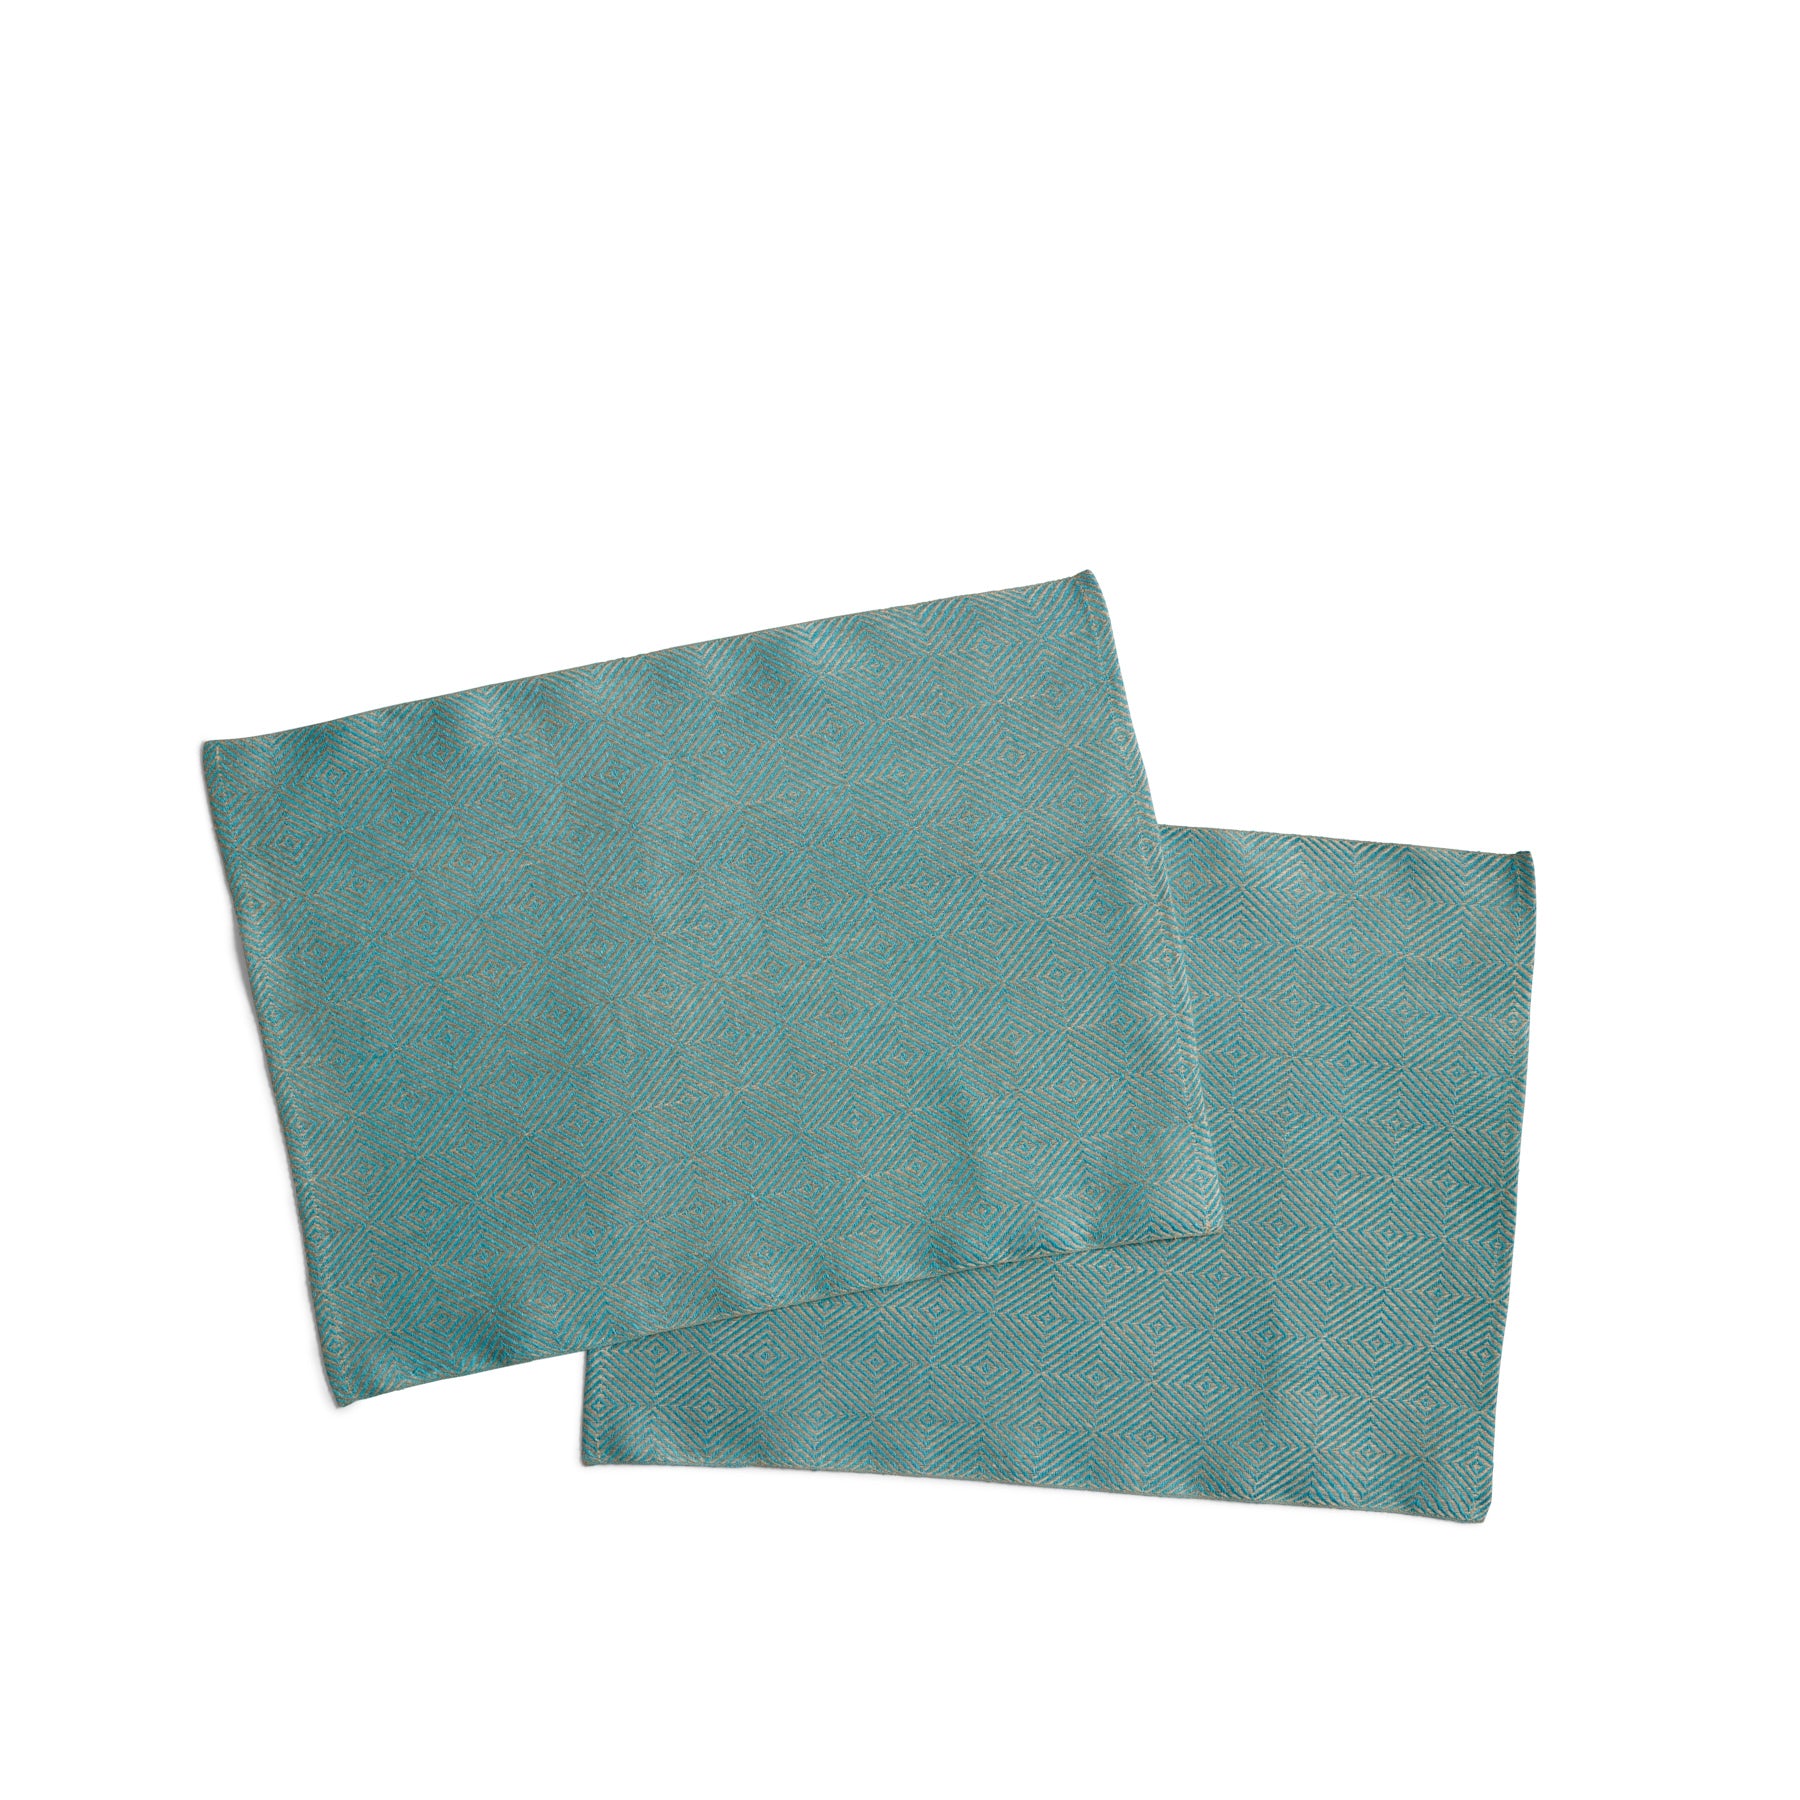 Rutig Strandrag Placemats in Turquoise/Unbleached (Set of 2) Zoom Image 1